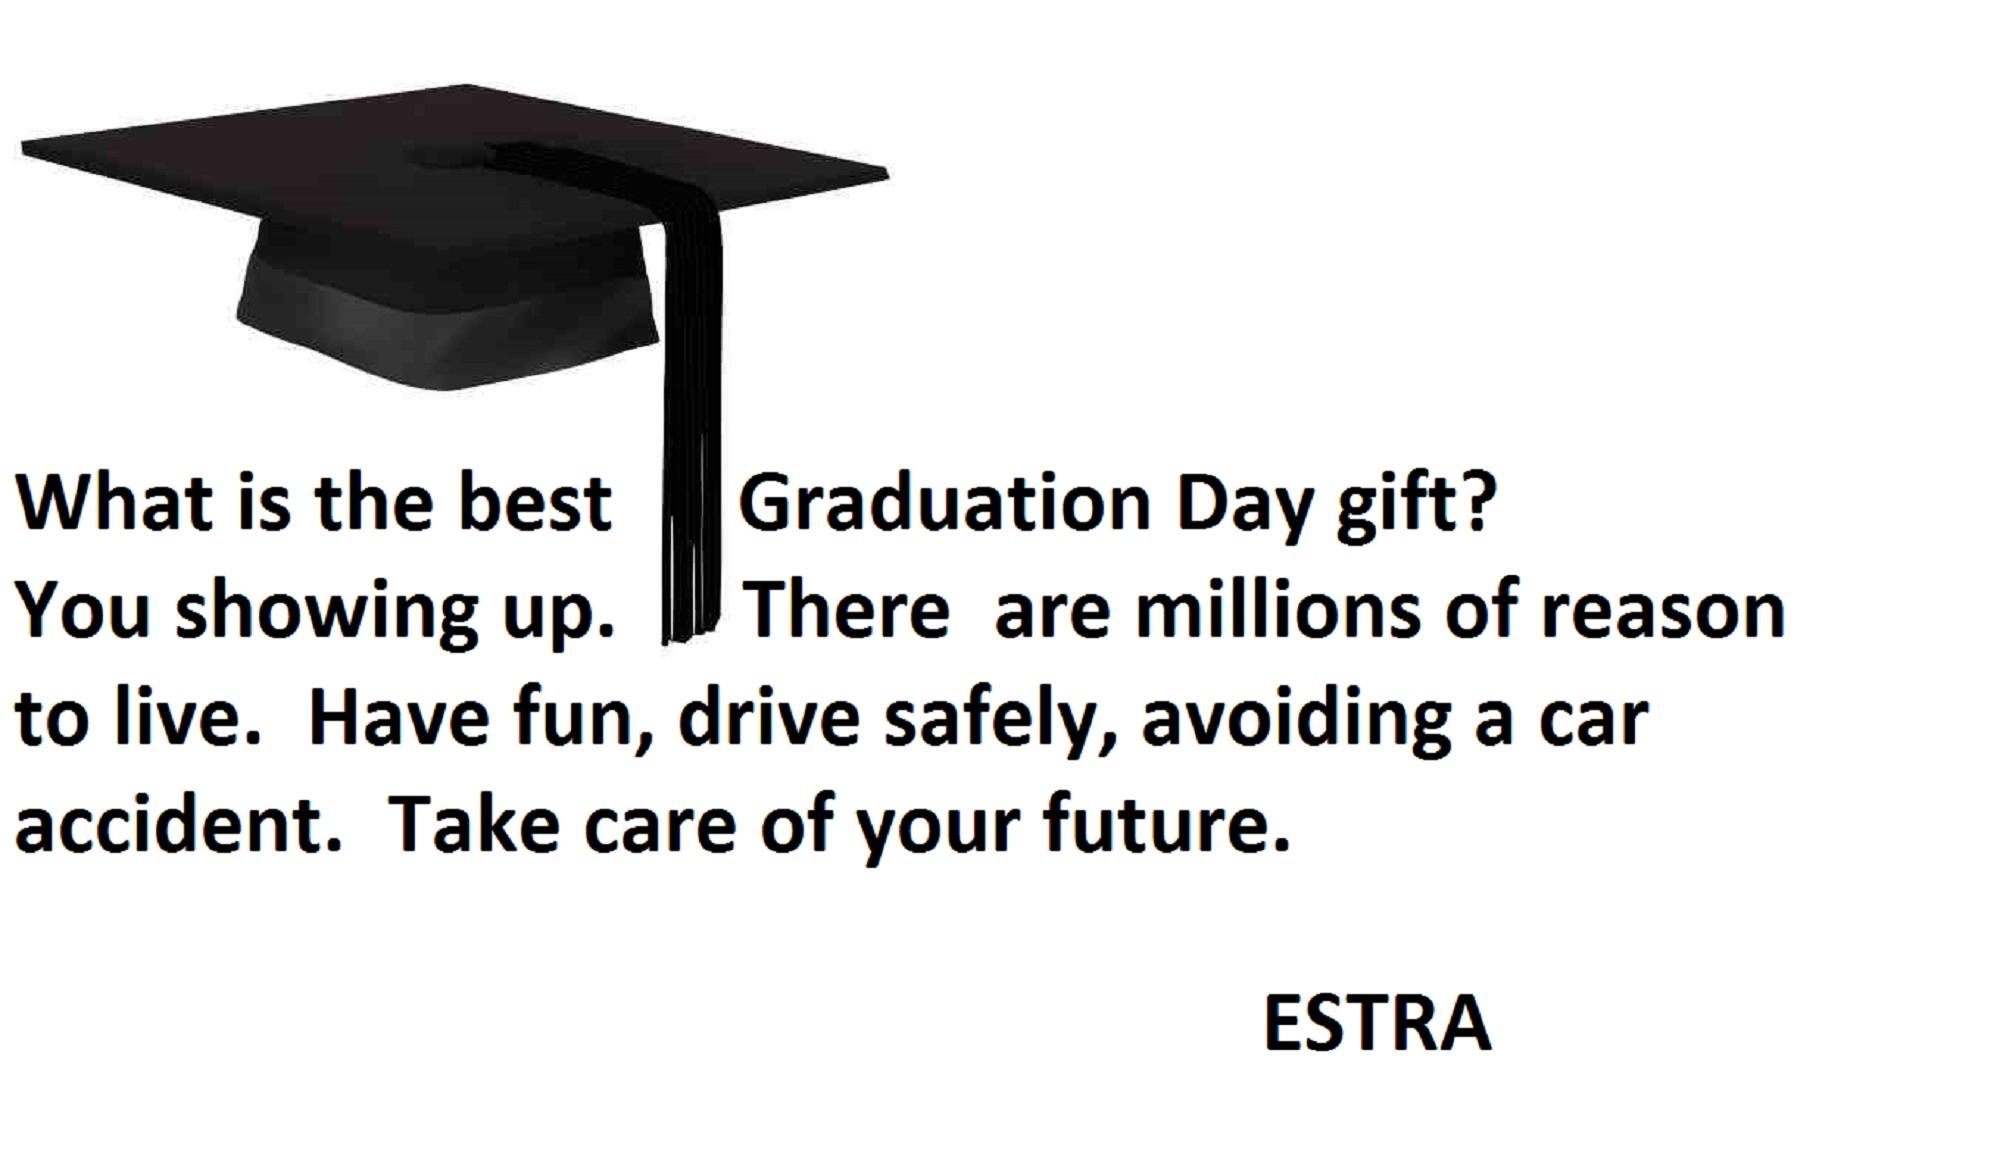 A new graduate deserves the chance to live. Too many car accidents take this away. Remember to drive safely while having fun.